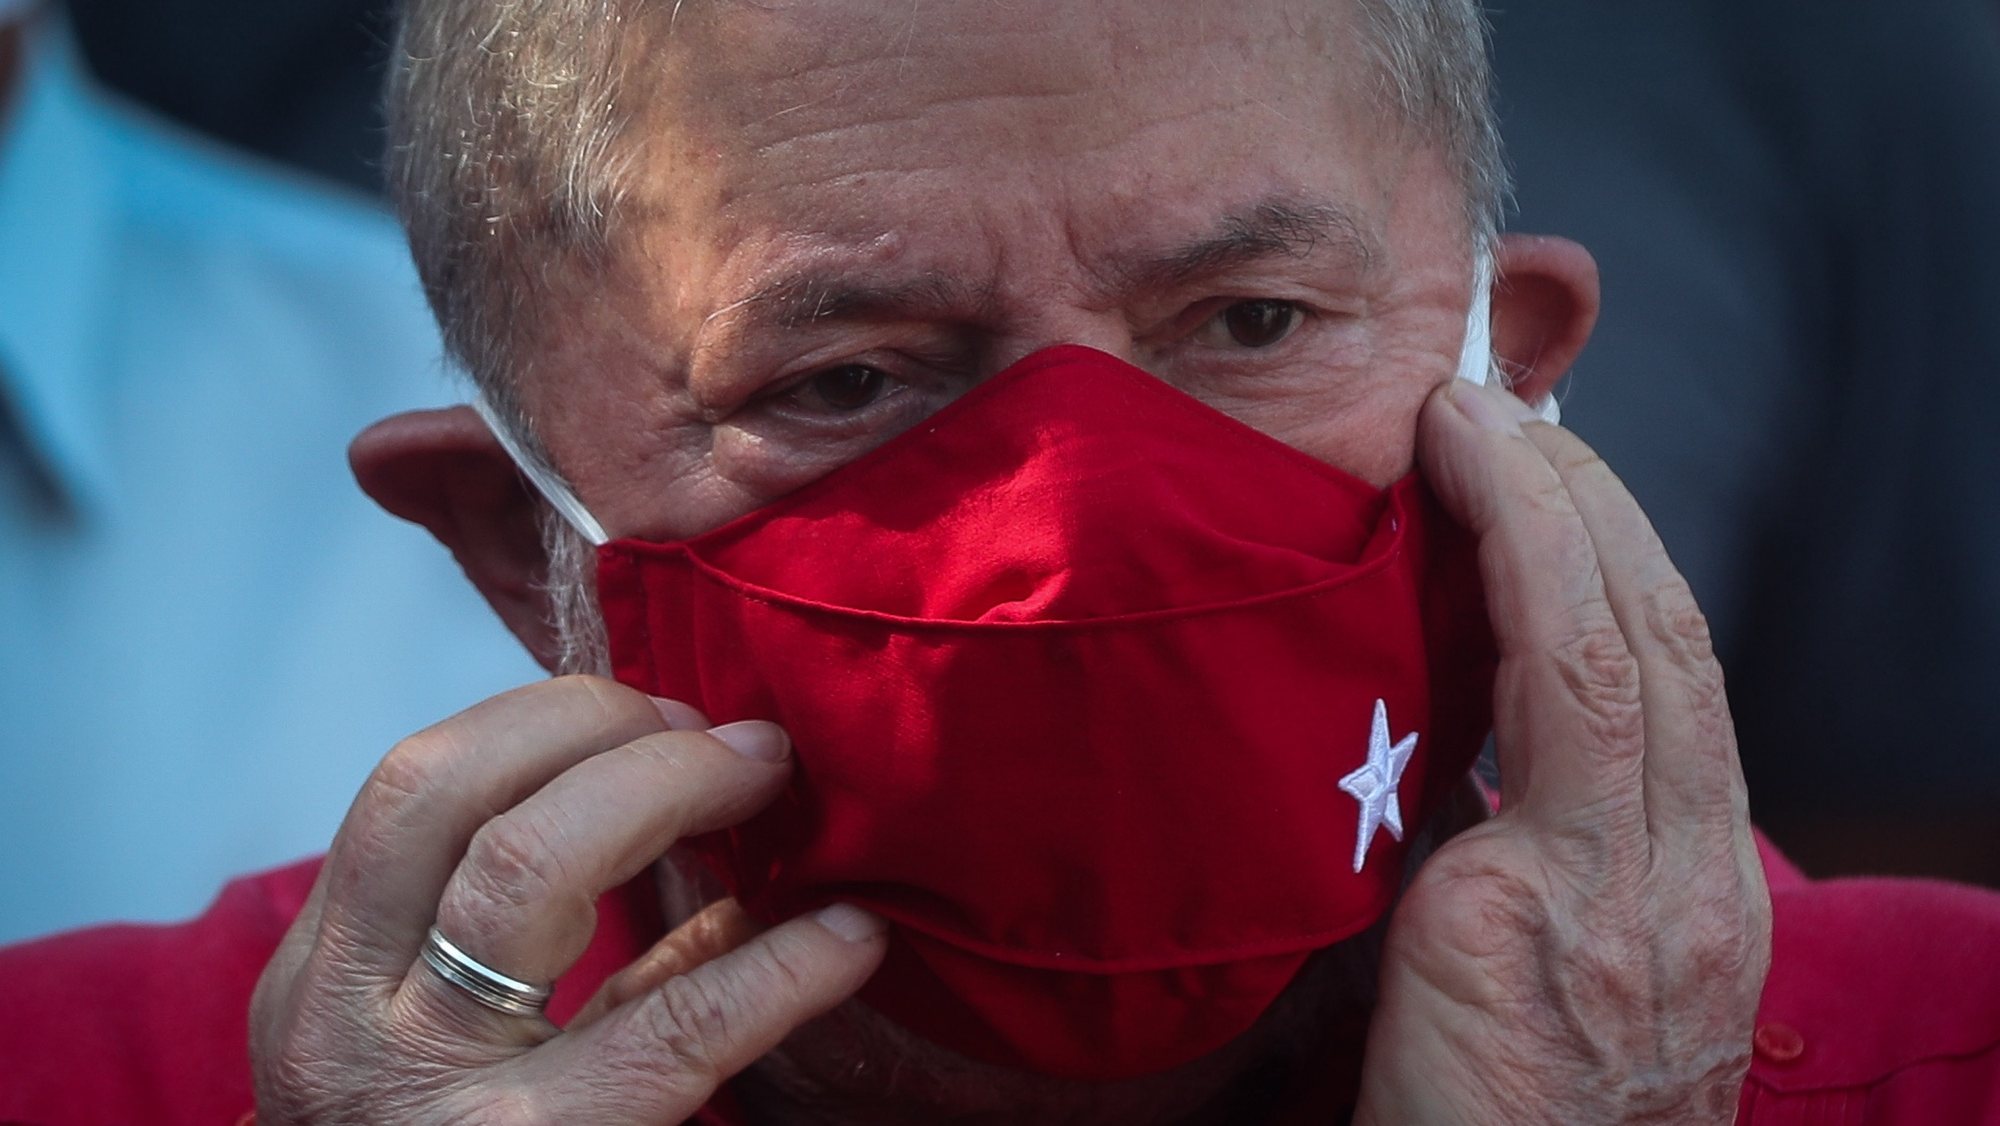 epa08822331 The Former President of Brazil, Luiz Inacio Lula da Silva, adjusts his facial mask while talking to the press after voting in Sao Bernardo do Campo, state of Sao Paulo, Brazil, 15 November 2020. Lula, president of Brazil between 2003 and 2010, voted in the country&#039;s local elections and asserted that his Workers&#039; Party (PT), &#039;will come out stronger&#039;, contradicting the forecasts of the polling institutes. &#039;It is a historic election of the PT, because I believe that it will come out very strengthened in these elections, against the doomsayers who bet on its disappearance&#039;, he told the press.  EPA/FERNANDO BIZERRA